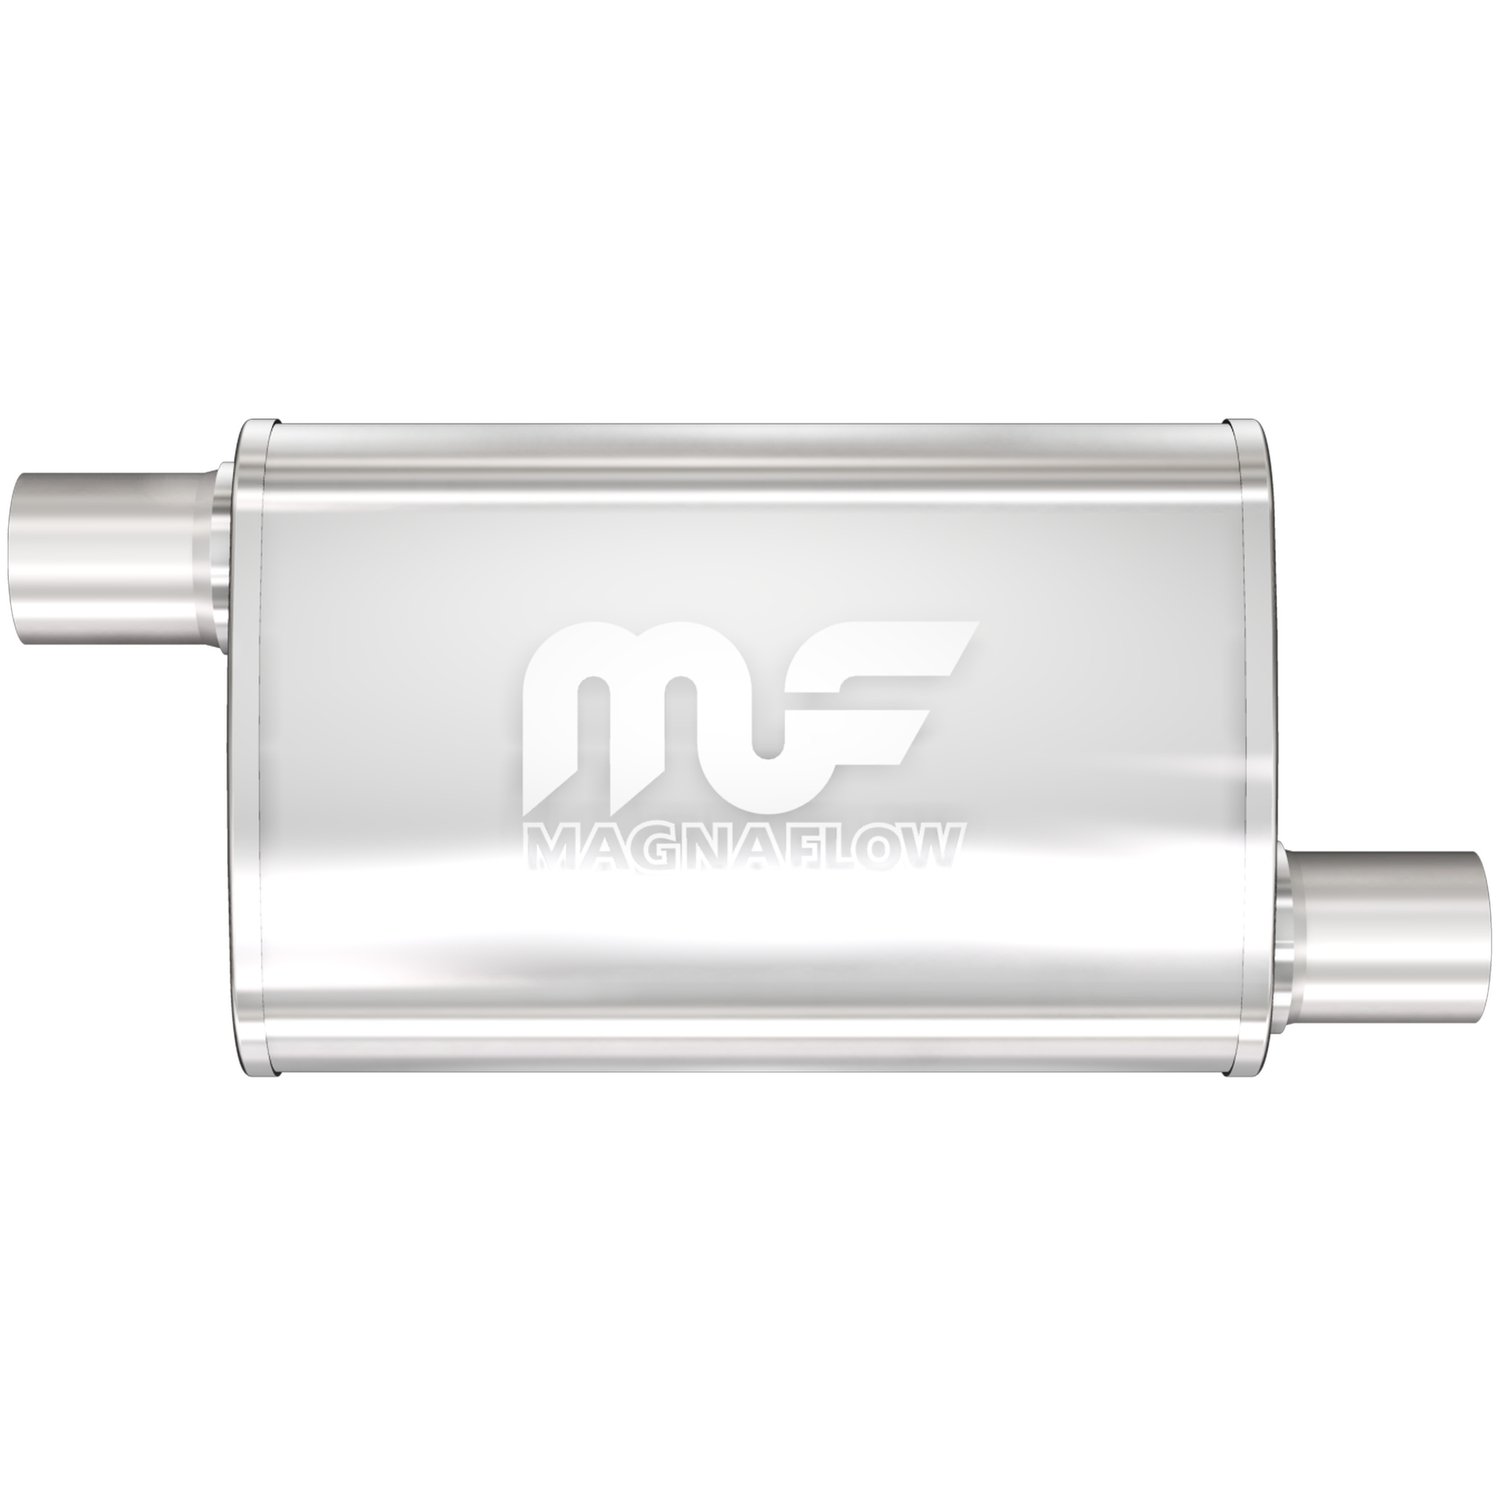 3.5" x 7" Oval Muffler Offset In/Offset Out: 2"/2" Body Length: 14" Overall Length: 20" Core Size: 2" Satin Finish